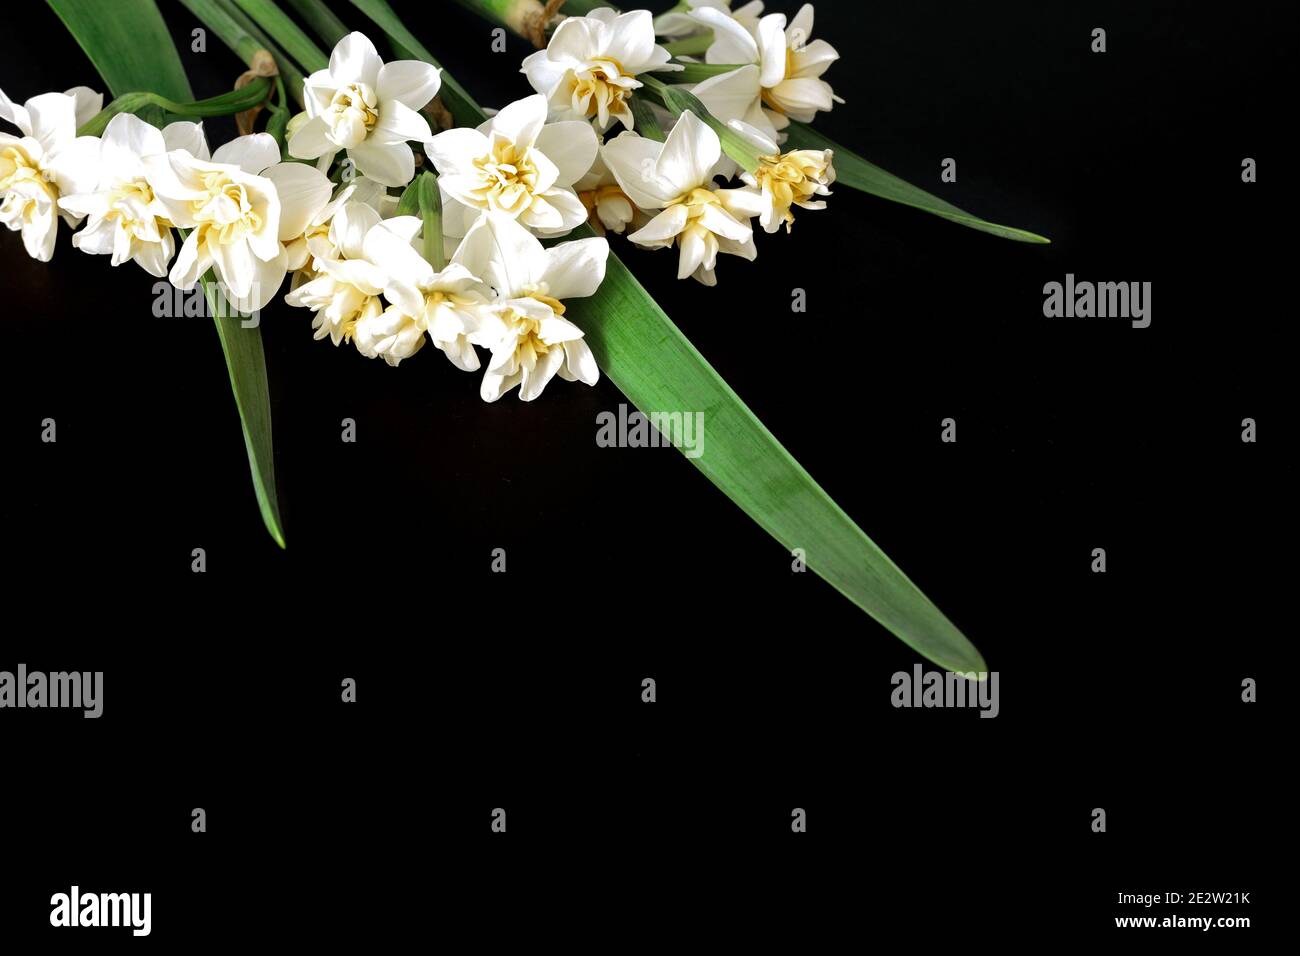 Narcissus flowers on black background, 8 March Happy Women's Day Concept. Stock Photo